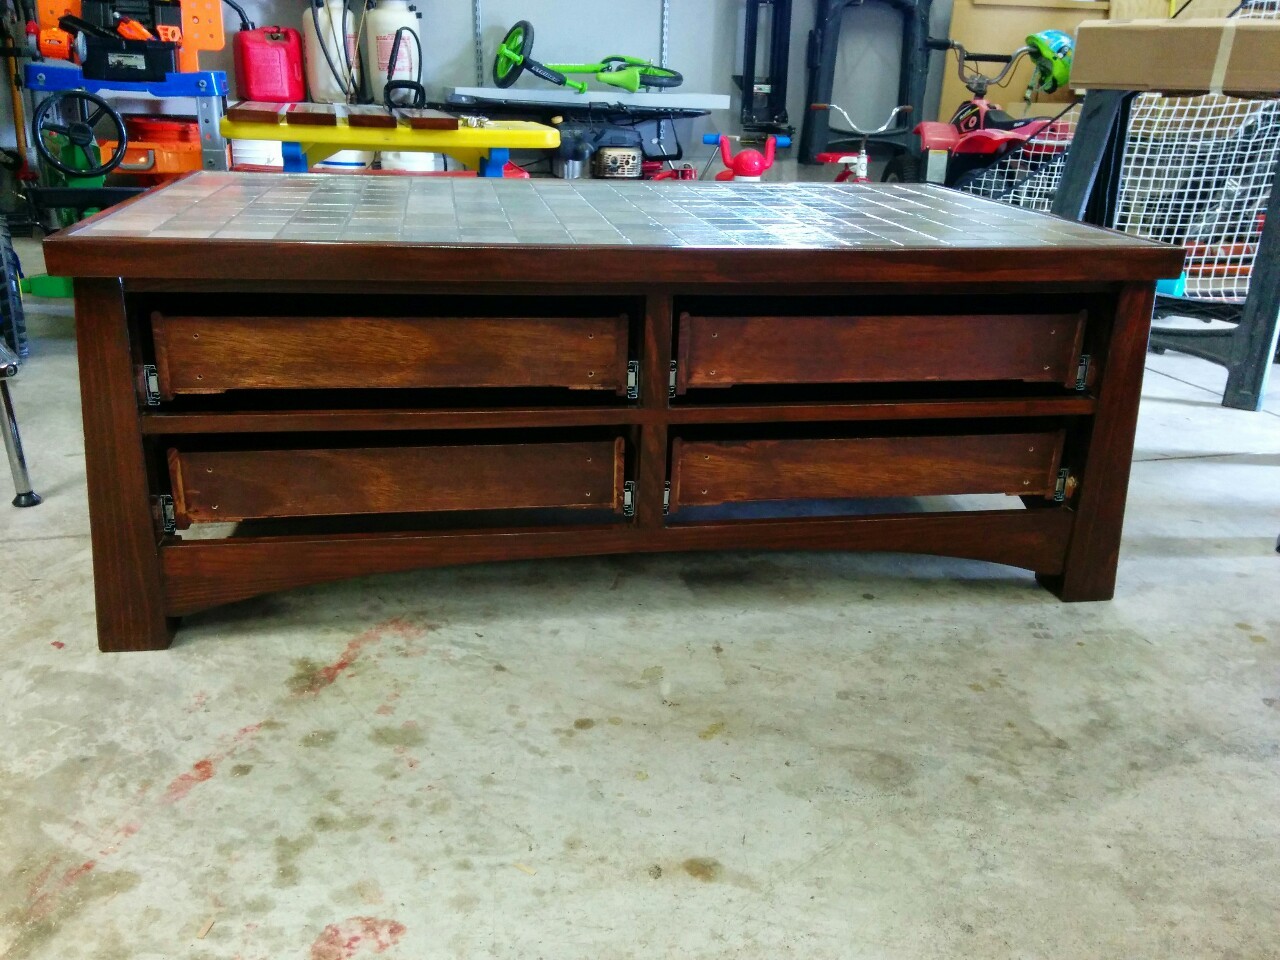 The MOchinist - Craigslist coffee table part 7: Finishing ...